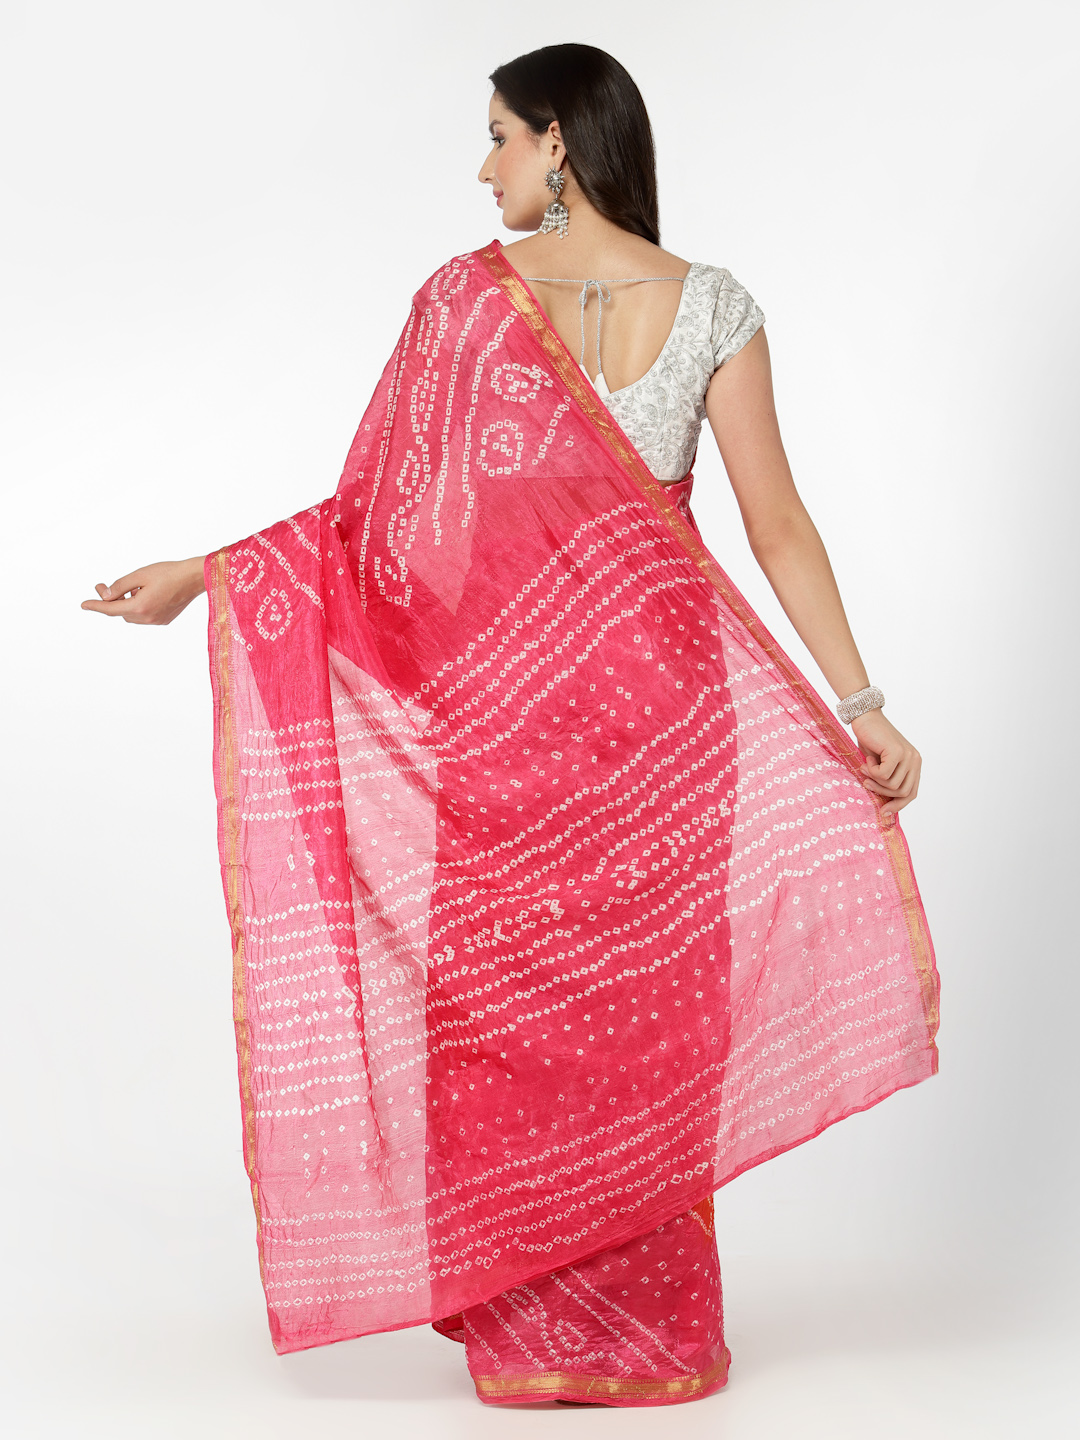 Women Silk Bandhani and Zari Weaving Saree with Unstitched Blouse - Pink And Orange